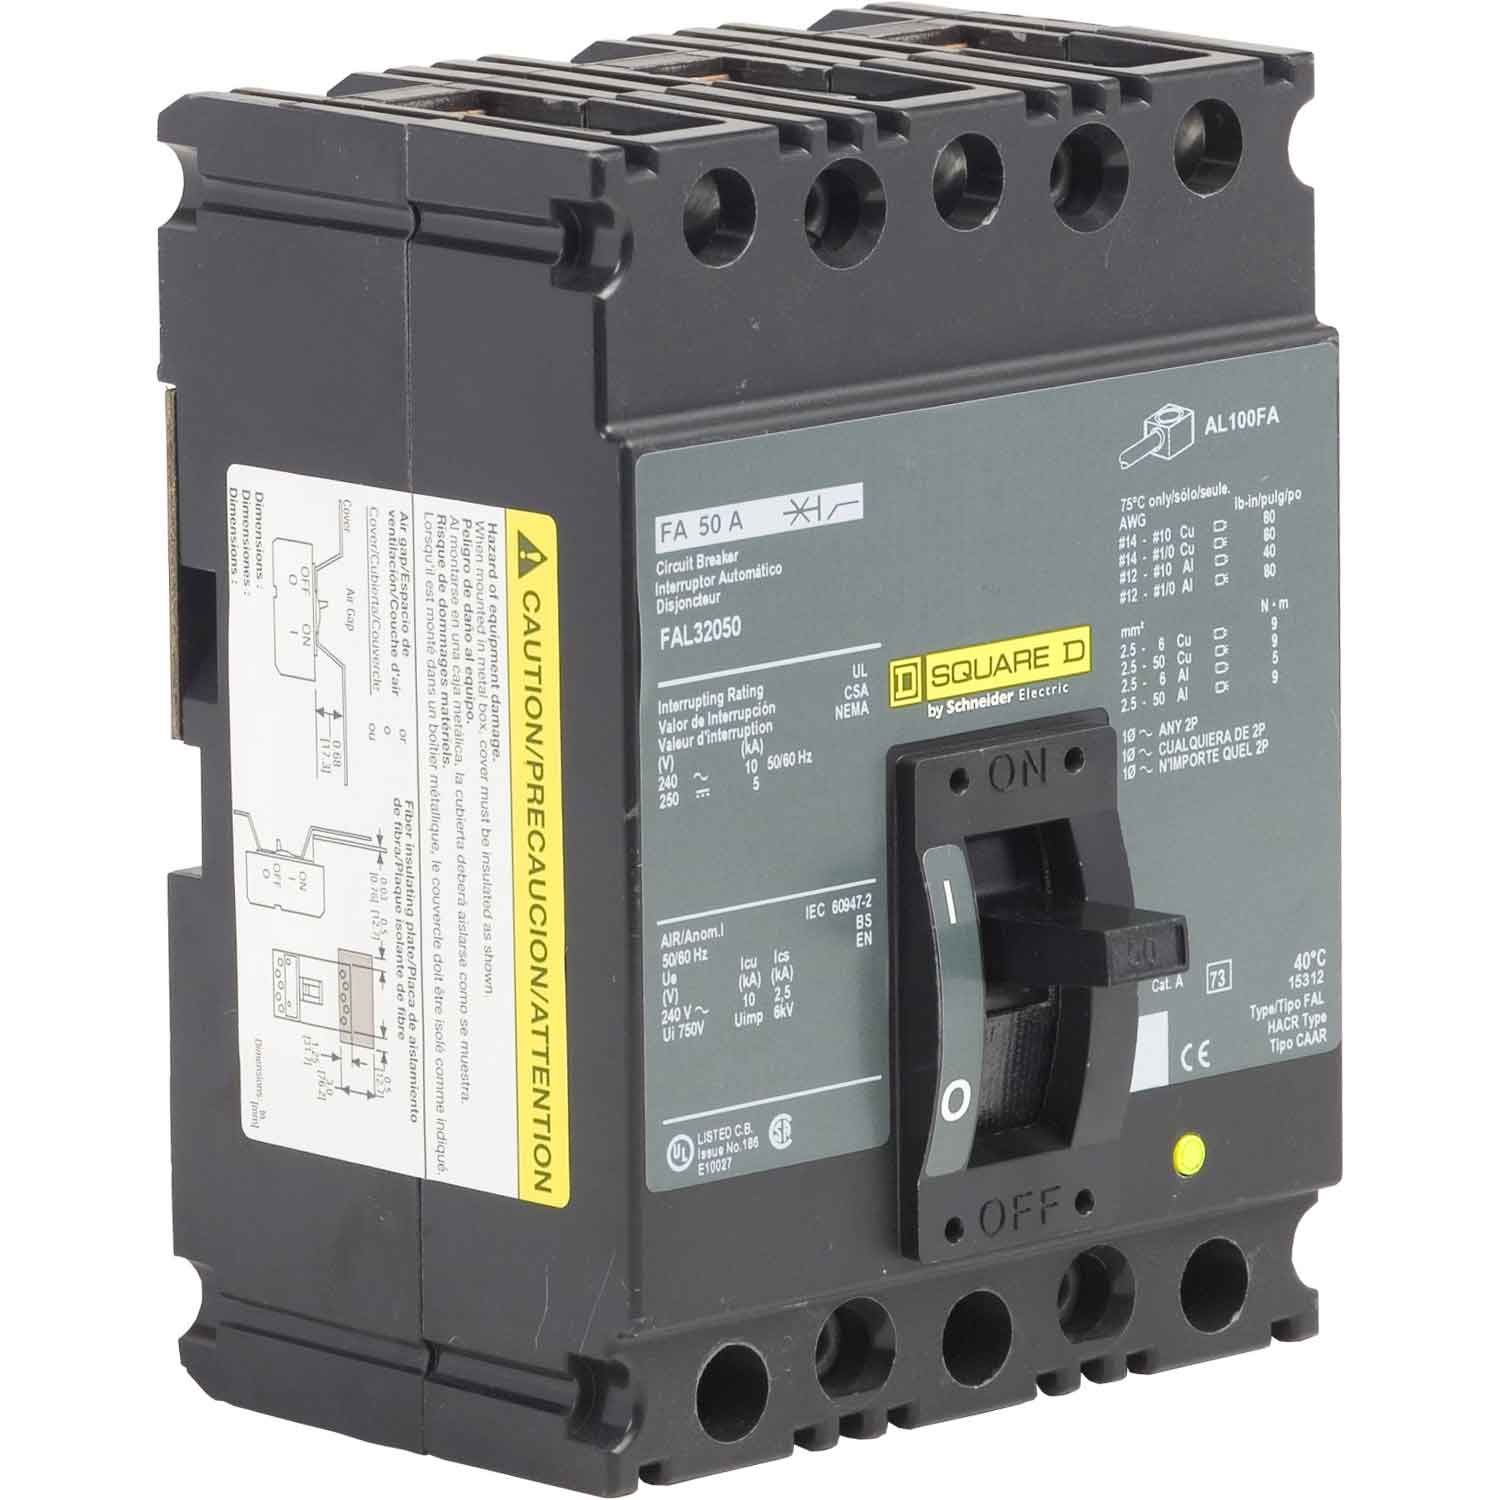 FAL32050 - Square D - Molded Case Circuit Breakers